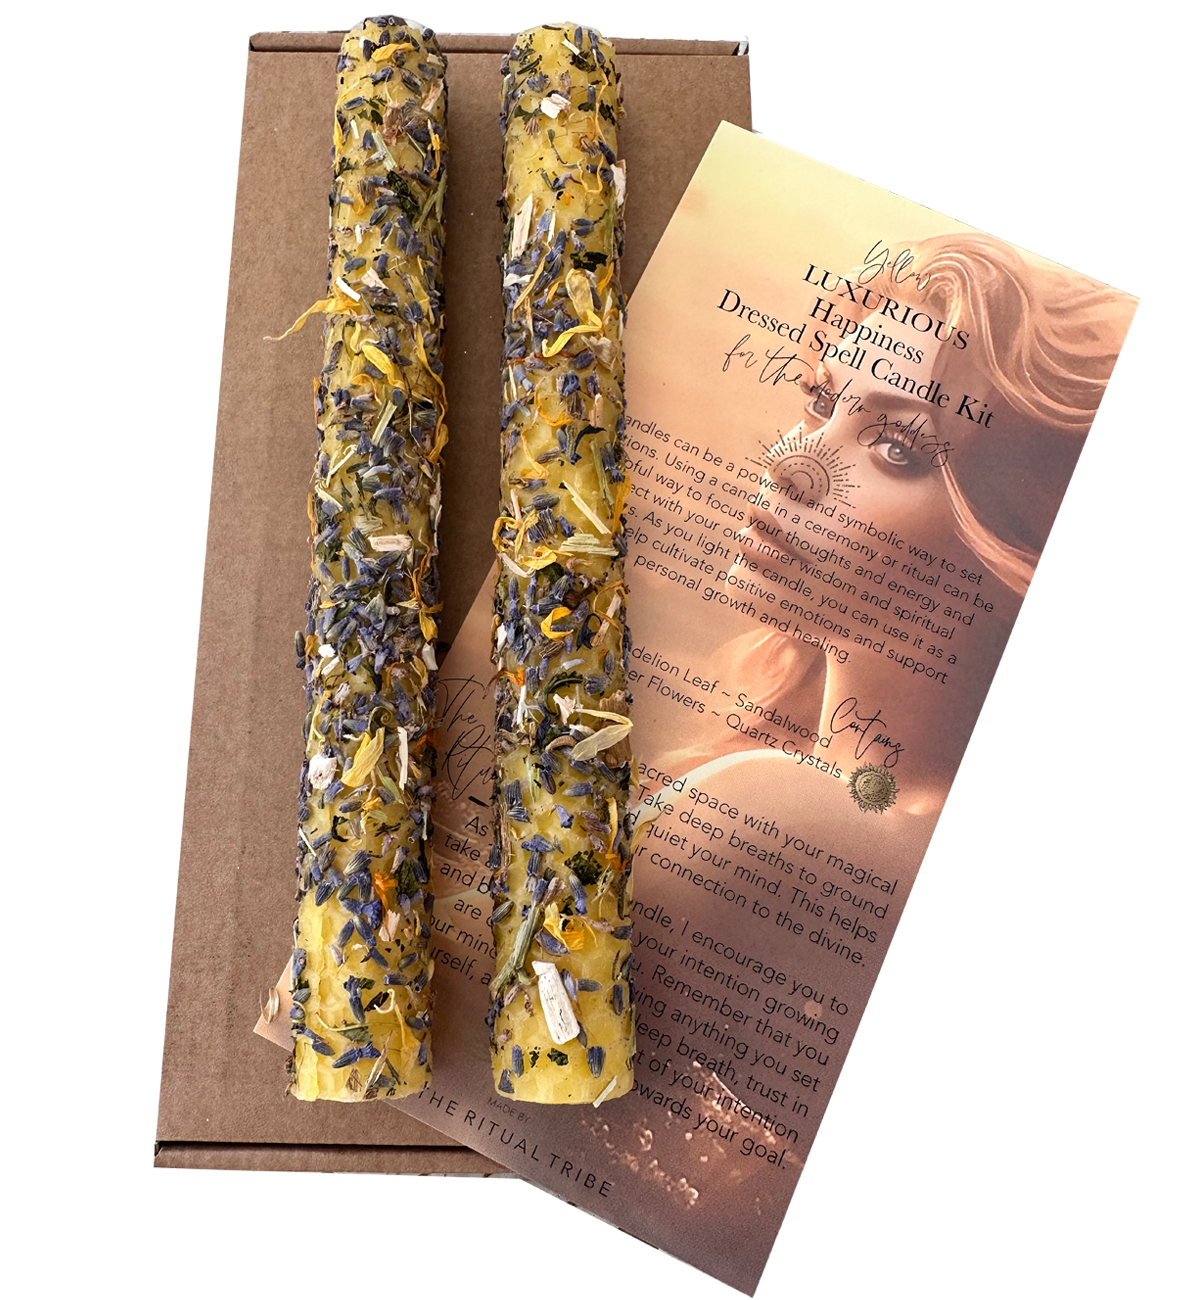 Yellow Luxurious Happiness Dressed Spell Candle Kit | For the Modern Goddess